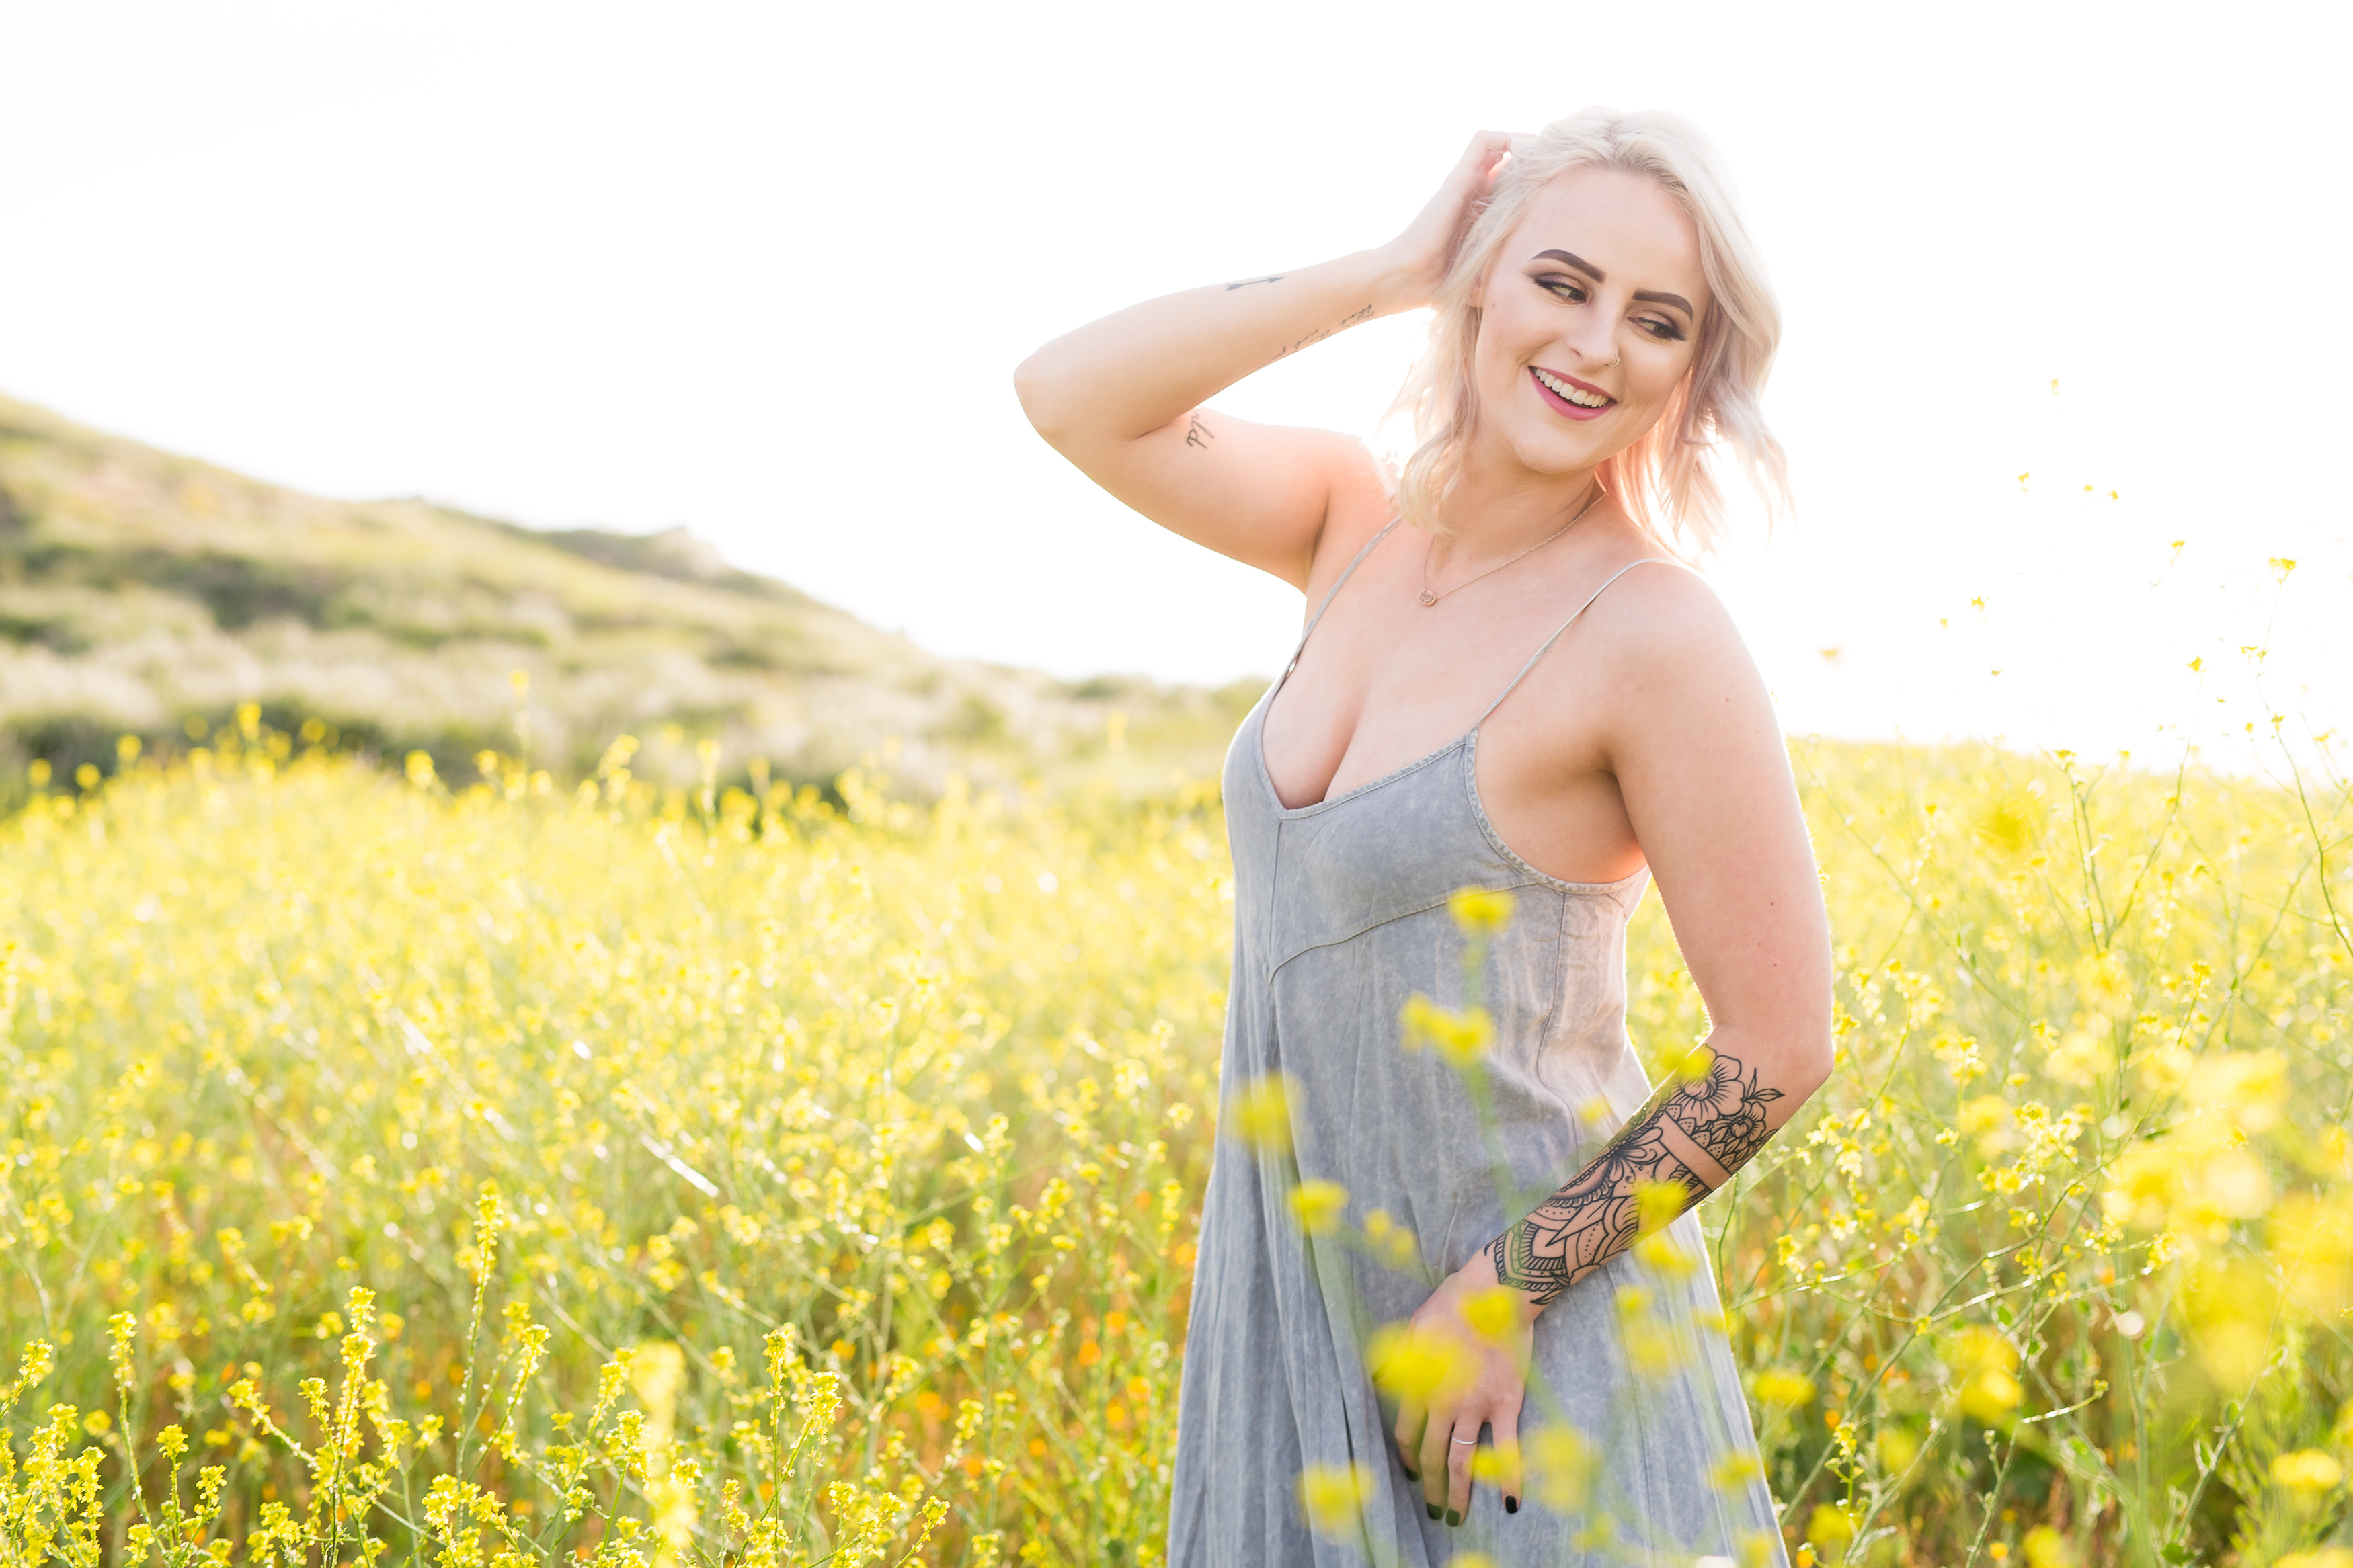 Girl smiling in field of yellow poppies